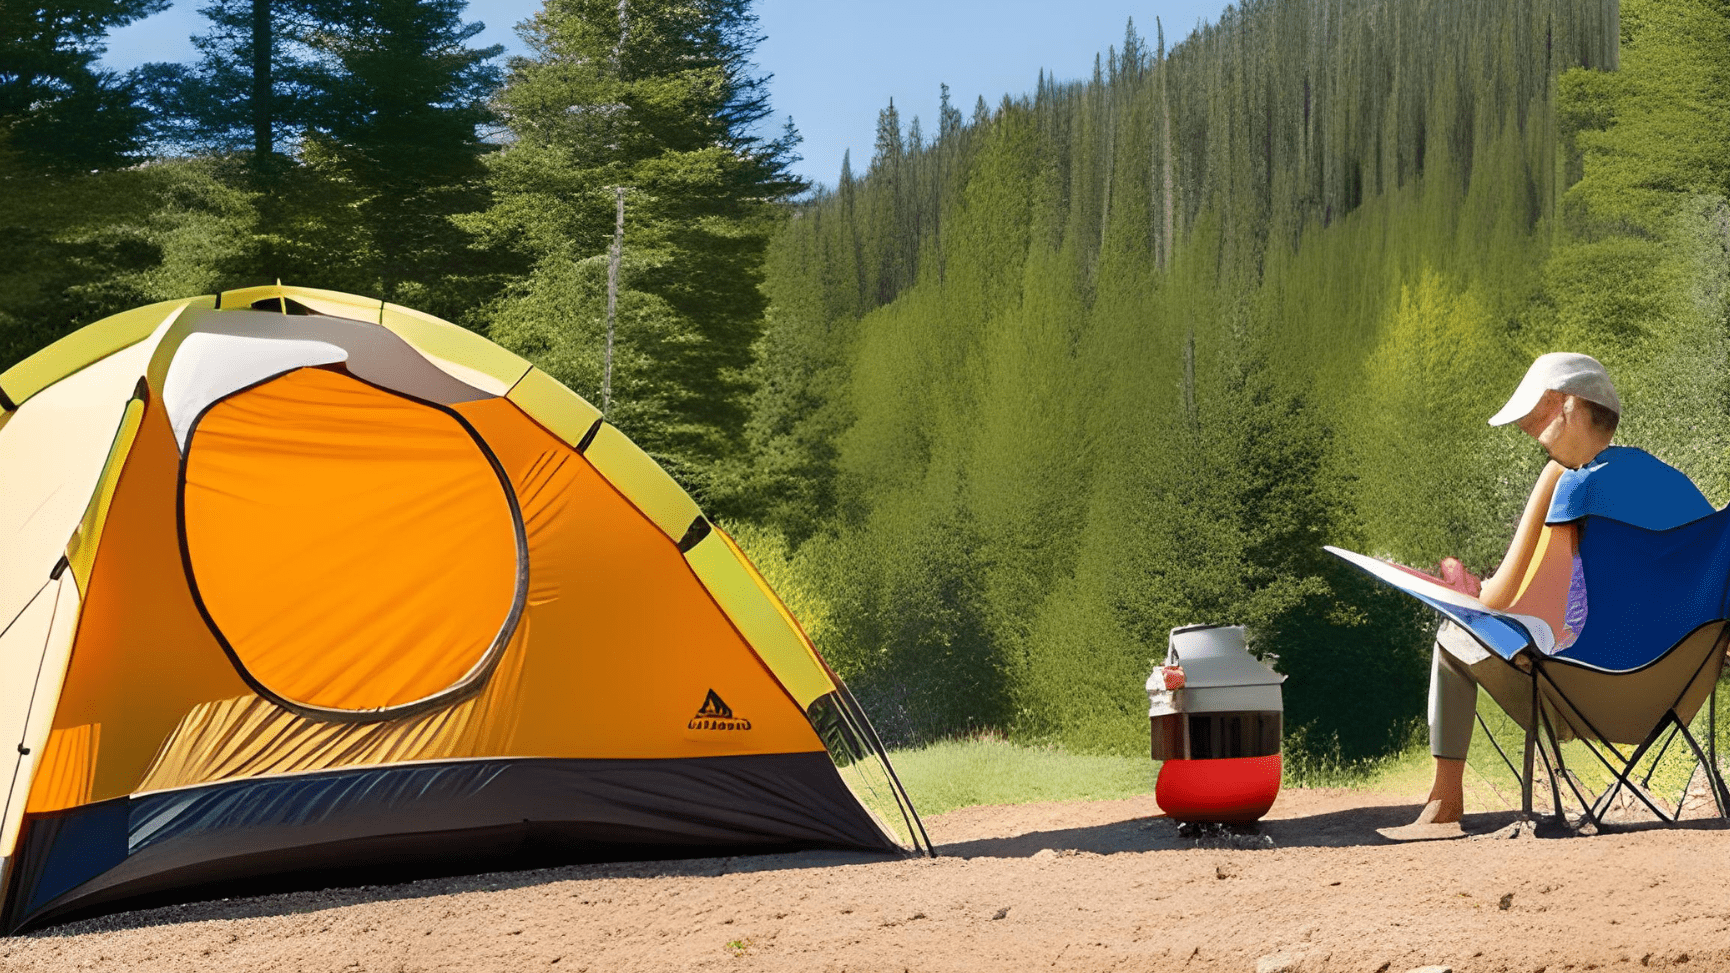 an image highlighting the etiquette and best practices for camping on private property